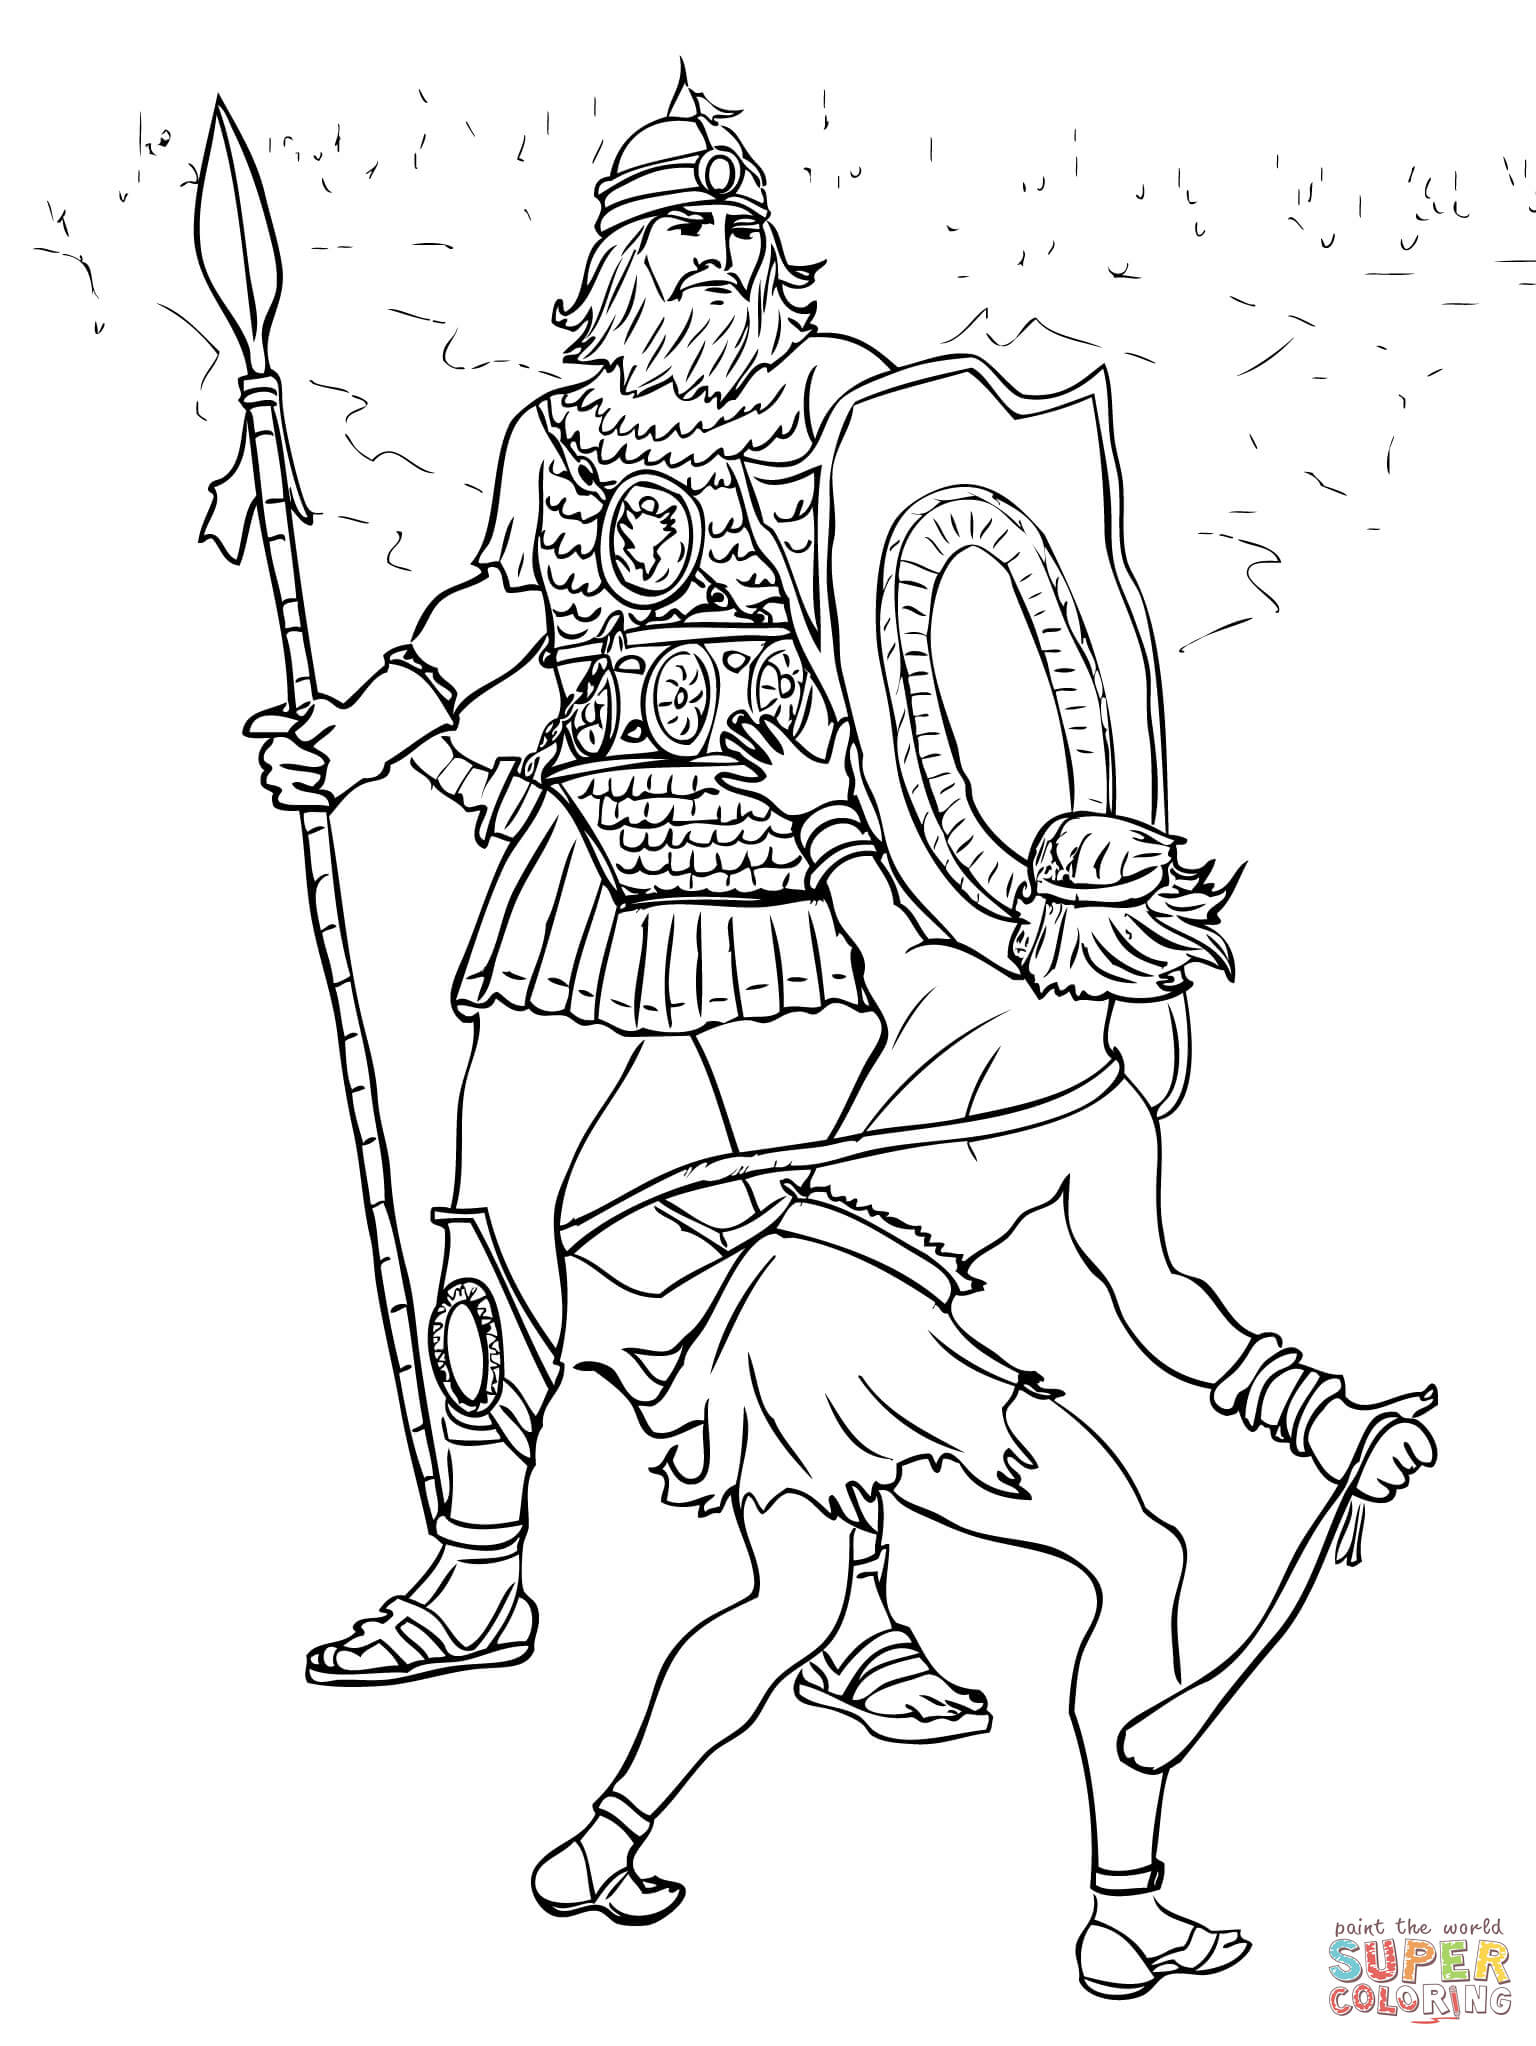 David and Goliath Fight coloring page | Free Printable Coloring Pages